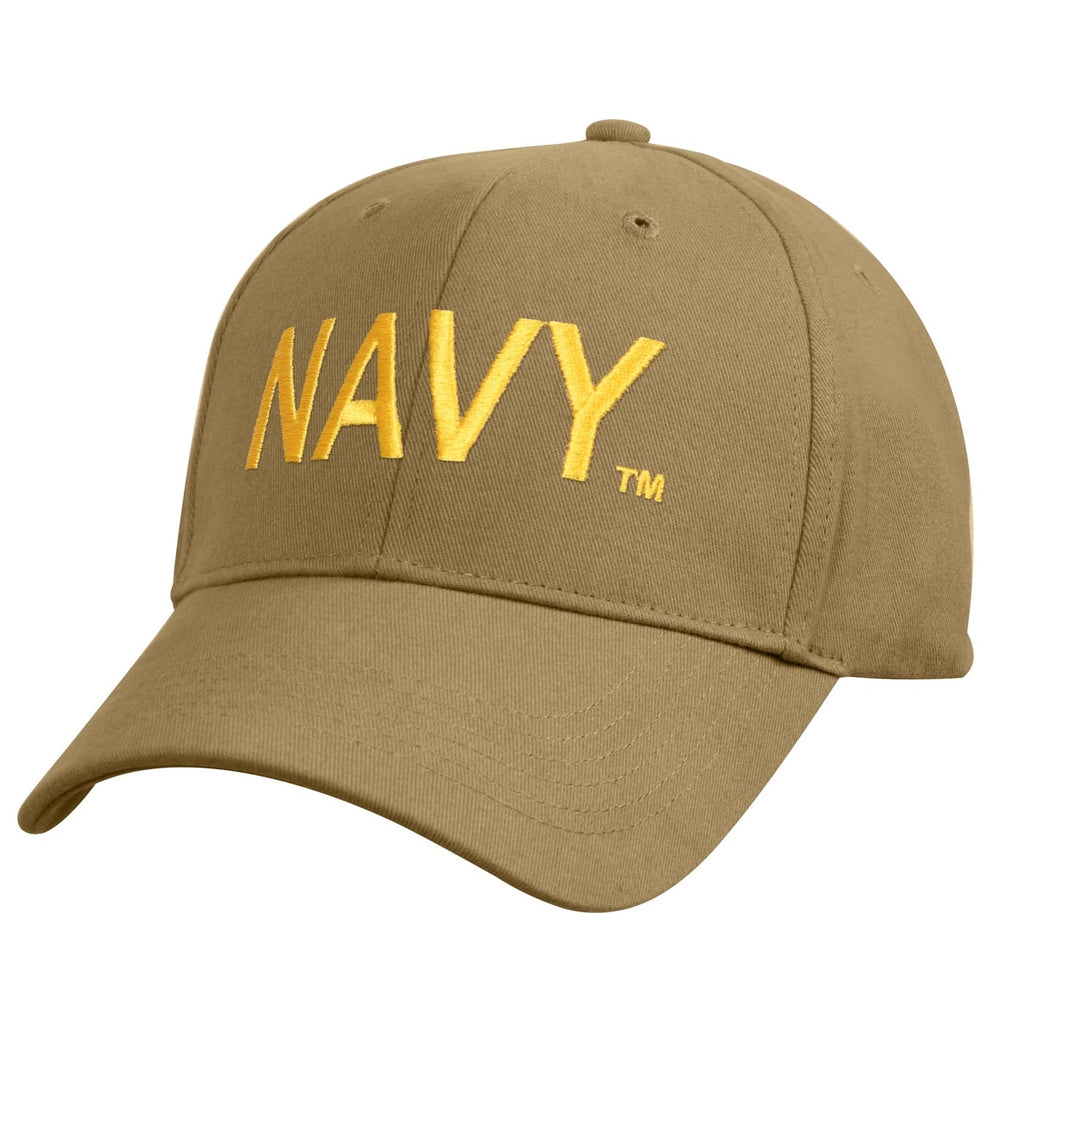 Low Profile Navy Cap - Coyote by Rothco